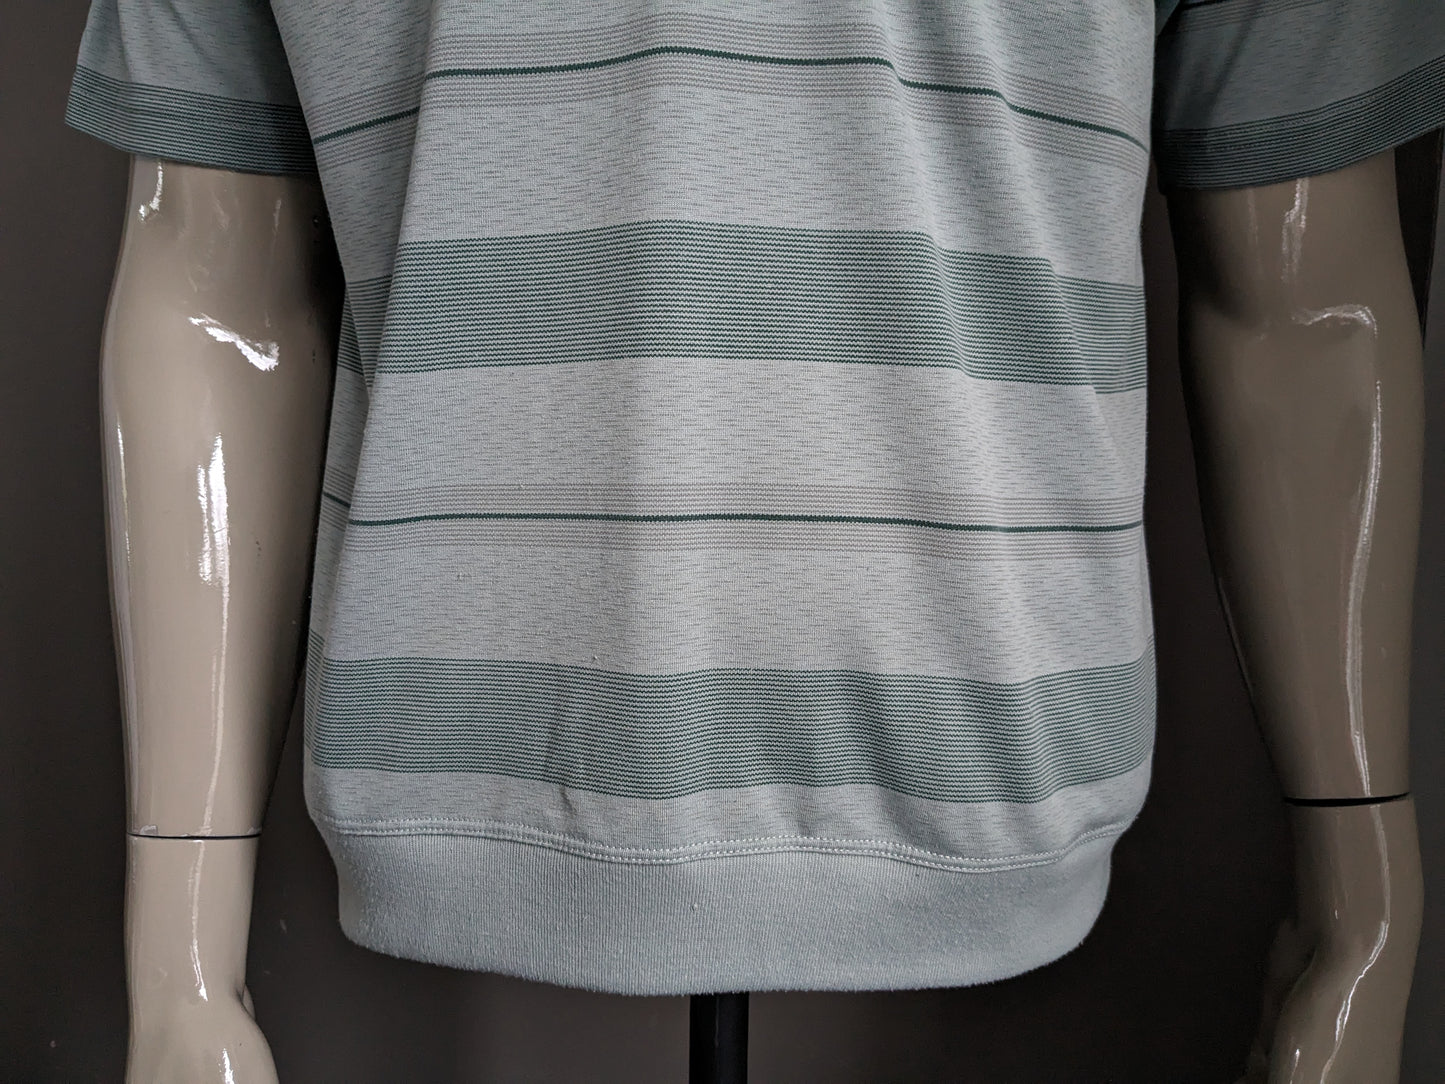 Vintage Humy Polo with elastic band and zipper. Green striped. Size M.